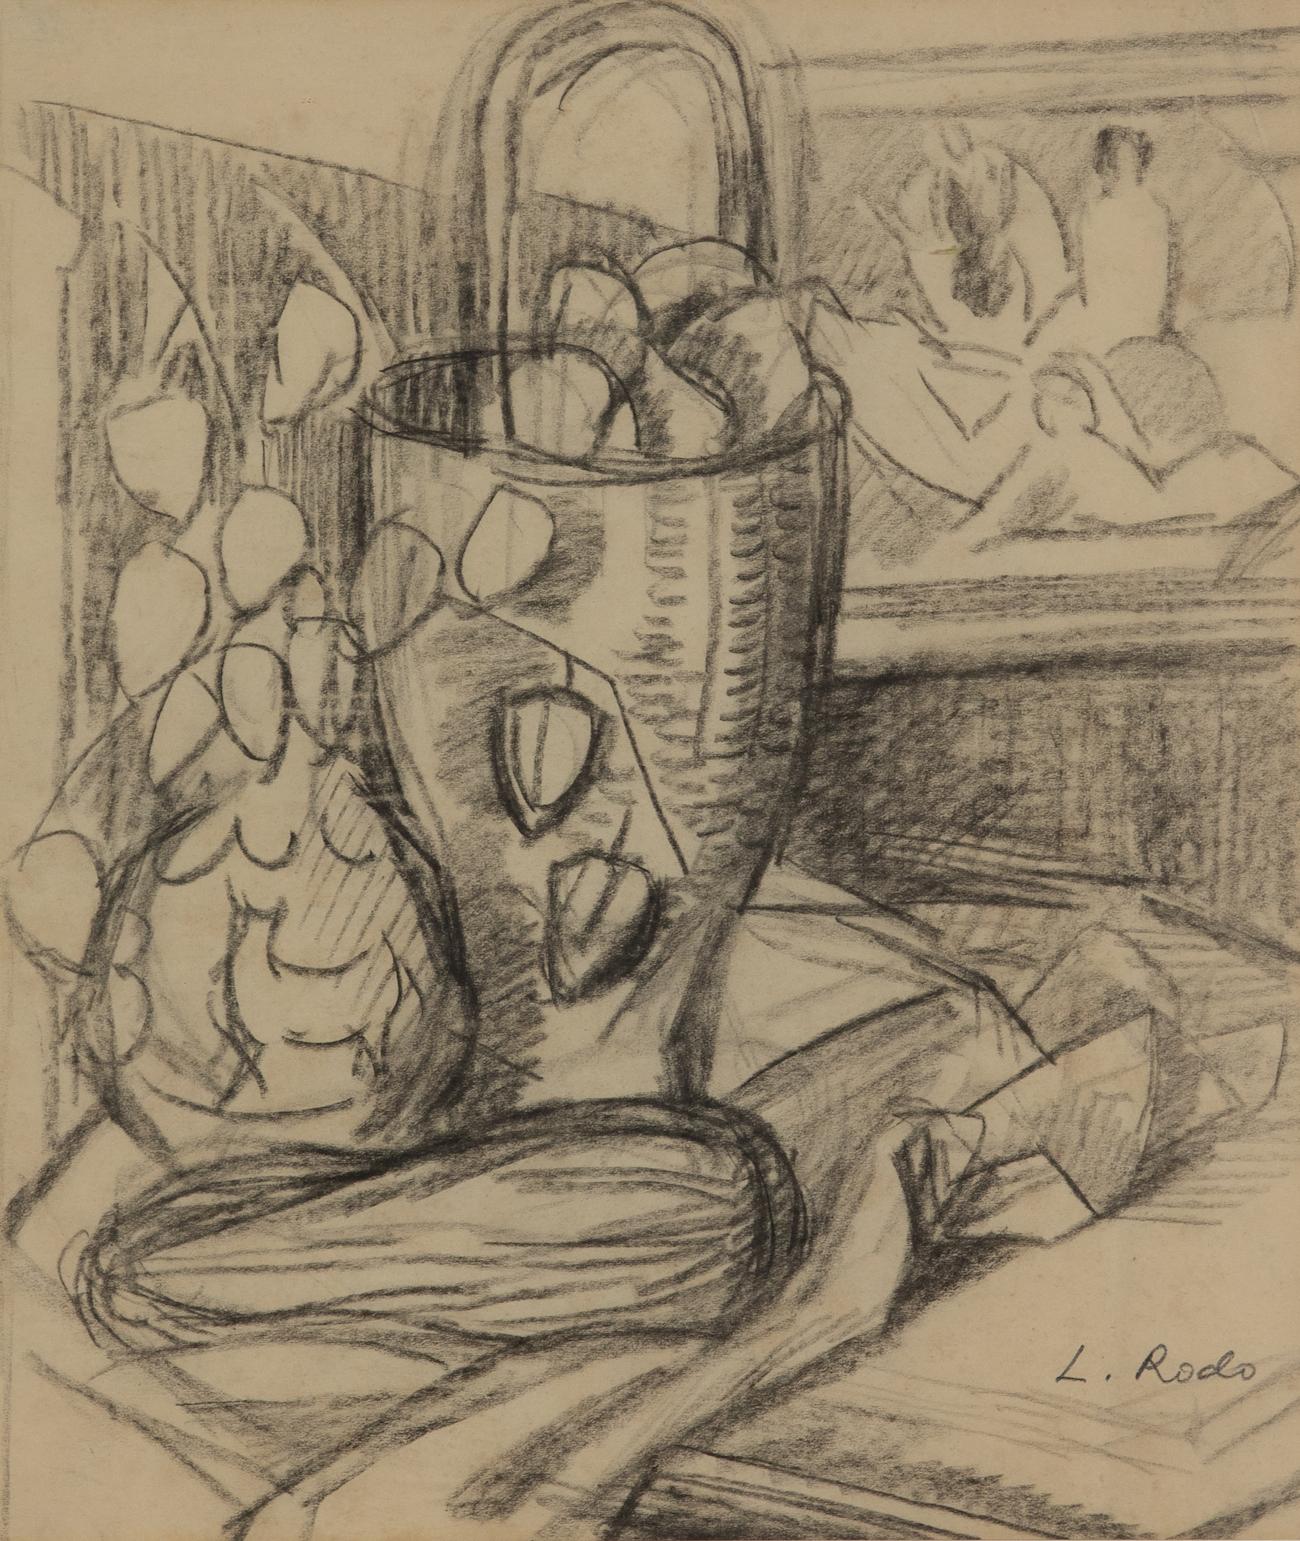 *UK BUYERS WILL PAY AN ADDITIONAL 20% VAT ON TOP OF THE ABOVE PRICE

Still Life by Ludovic-Rodo Pissarro (1878-1952)
Charcoal on paper
28.4 x 24.3 cm (11 ⅛ x 9 ⅝ inches)
Signed lower right, L. Rodo

Provenance
Private Collection, London

This work